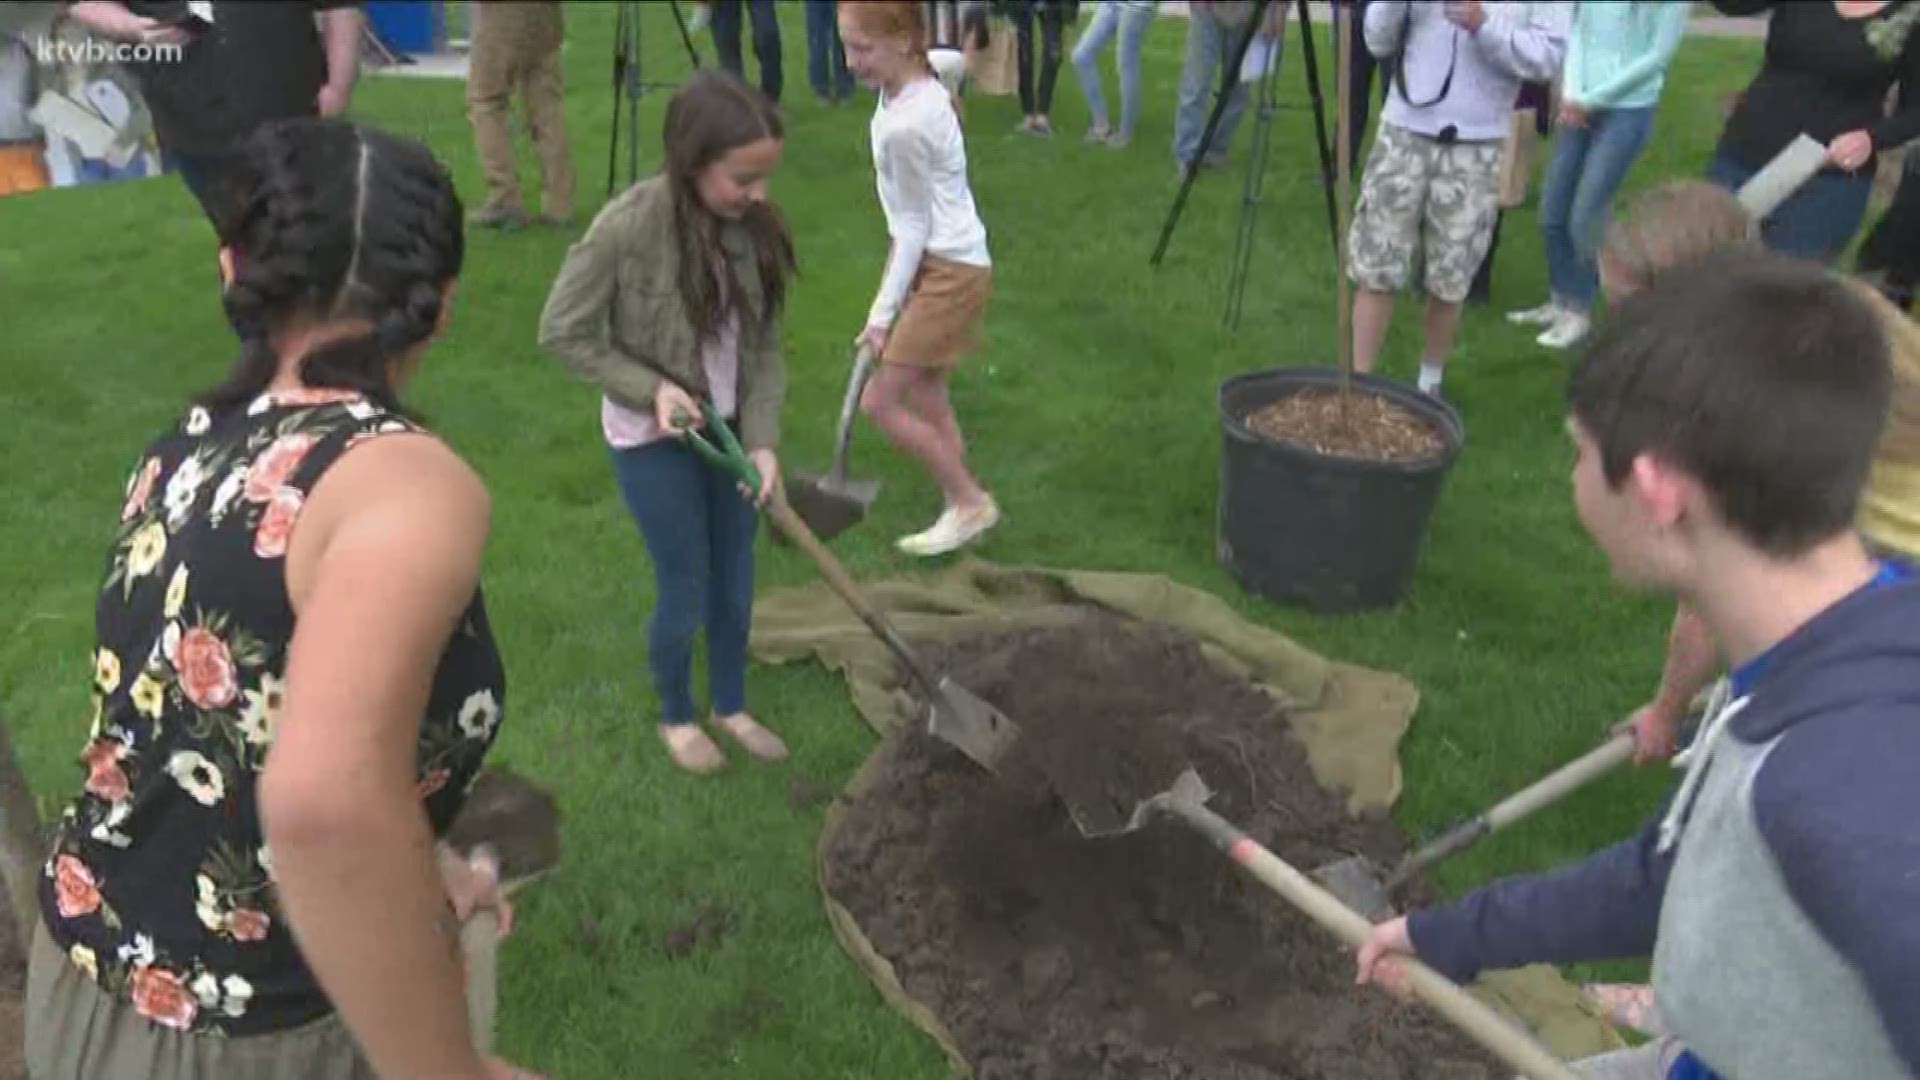 After the formal ceremony, people gathered outside the State Capitol to plant a tree together.